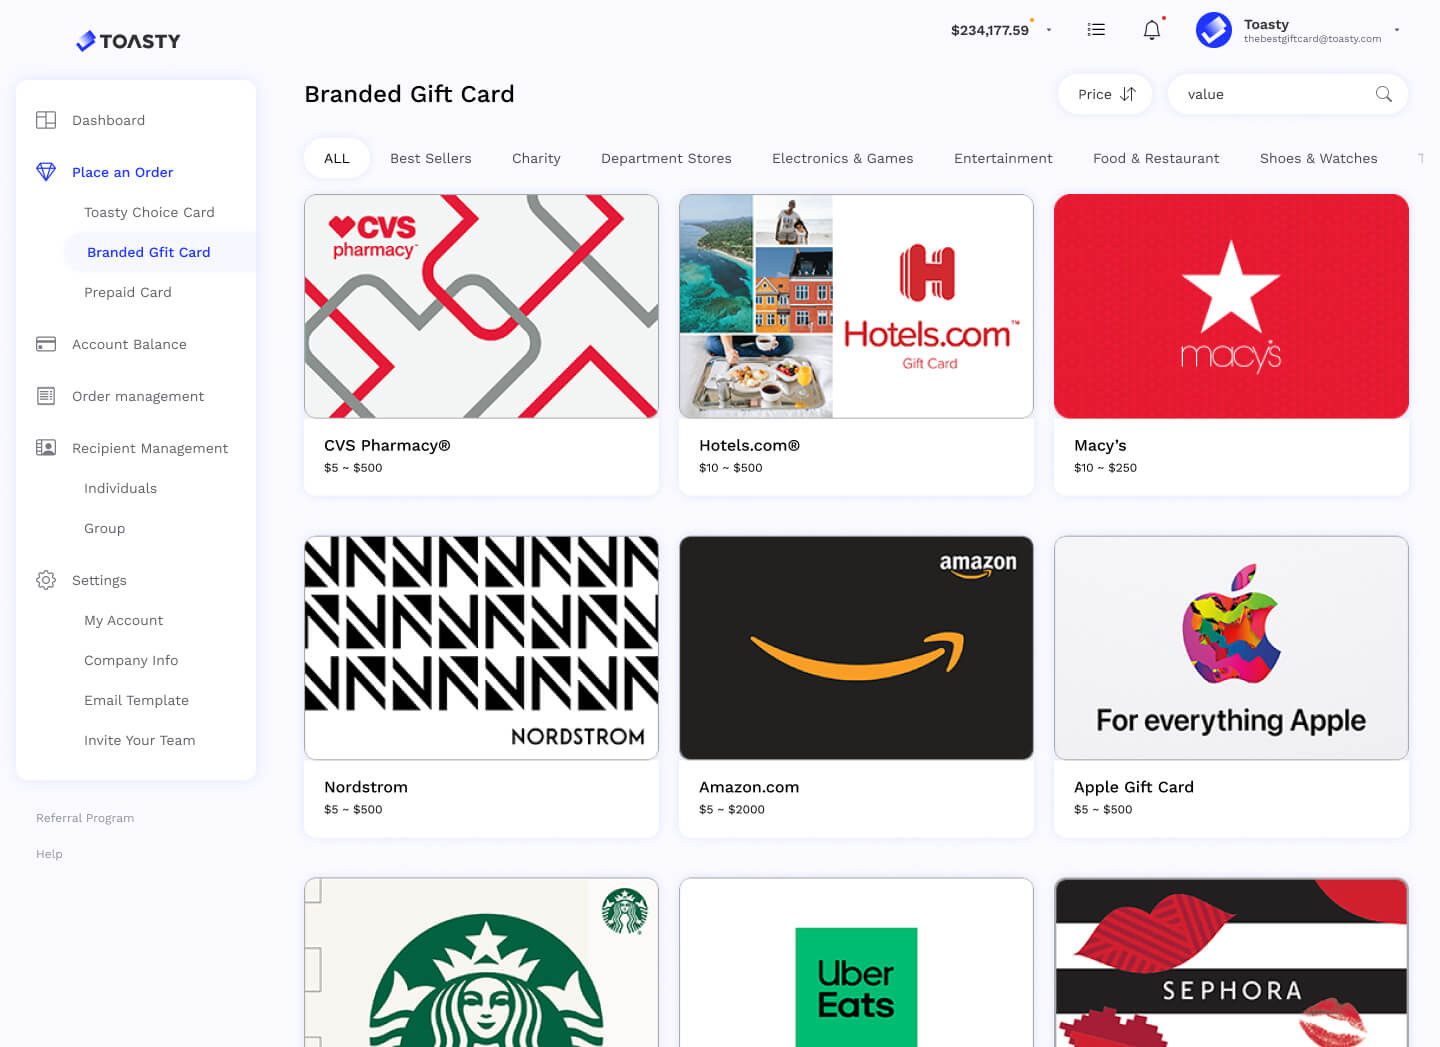 Branded Gift Card page on Toasty dashboard